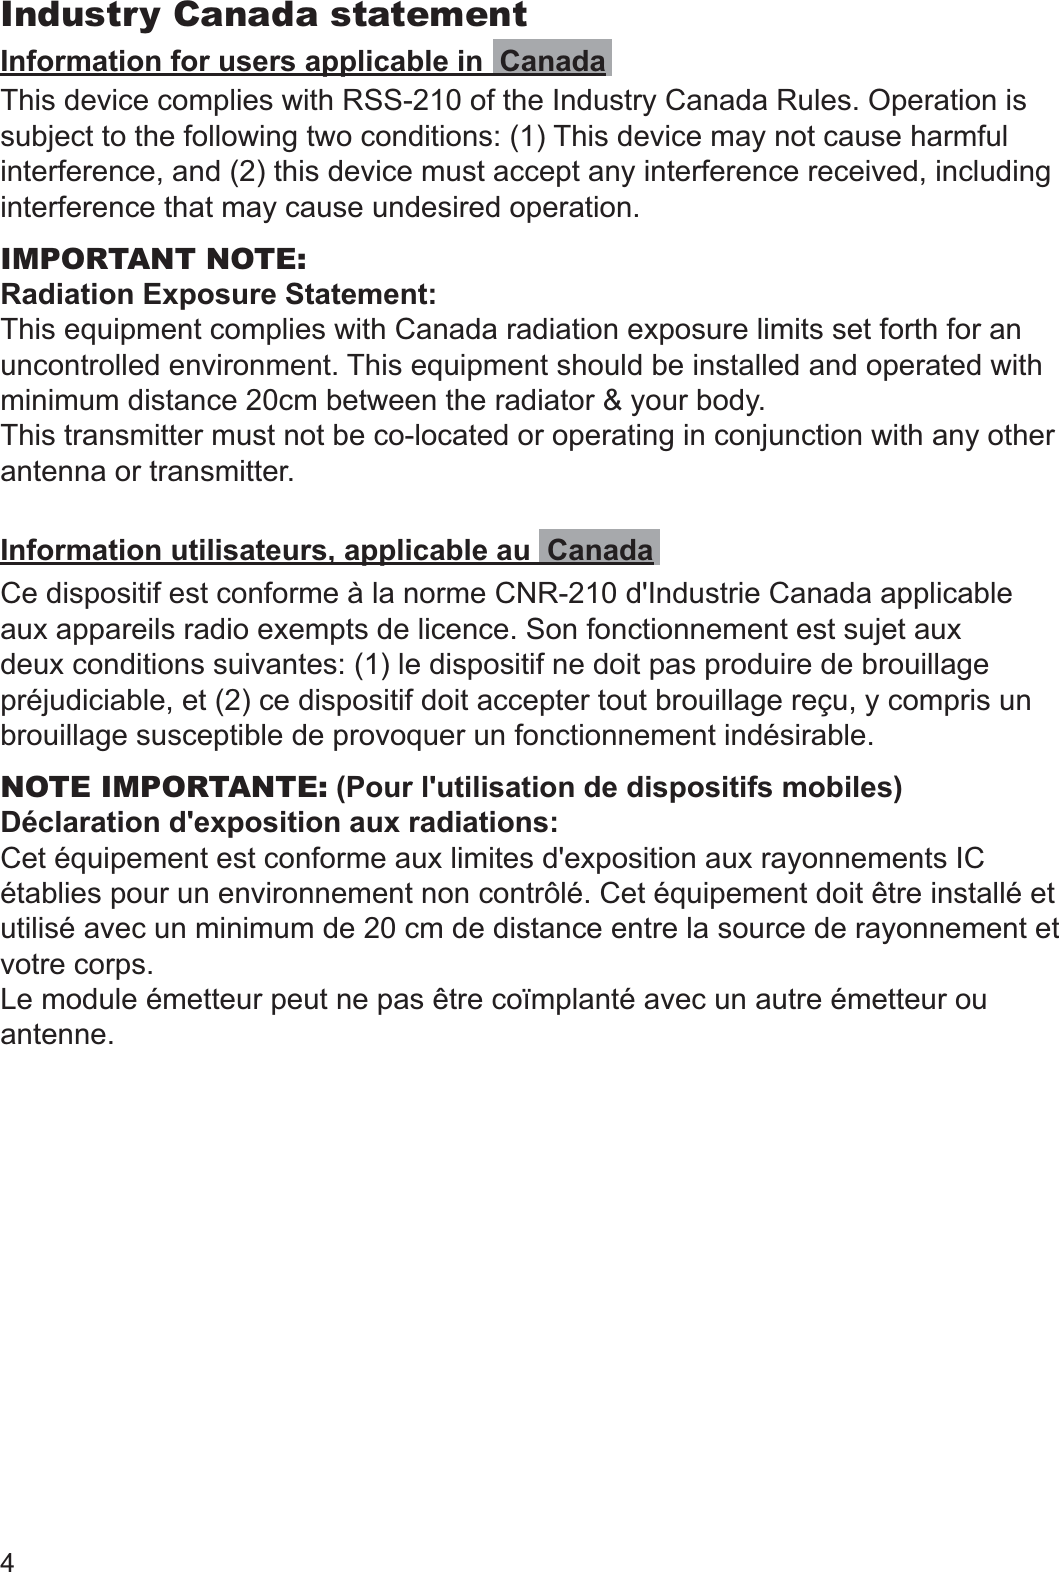 4Industry Canada statementInformation for users applicable in  CanadaThis device complies with RSS-210 of the Industry Canada Rules. Operation is subject to the following two conditions: (1) This device may not cause harmful interference, and (2) this device must accept any interference received, including interference that may cause undesired operation.IMPORTANT NOTE:Radiation Exposure Statement:This equipment complies with Canada radiation exposure limits set forth for an uncontrolled environment. This equipment should be installed and operated with minimum distance 20cm between the radiator &amp; your body.This transmitter must not be co-located or operating in conjunction with any other antenna or transmitter.Information utilisateurs, applicable au  CanadaCe dispositif est conforme à la norme CNR-210 d&apos;Industrie Canada applicable aux appareils radio exempts de licence. Son fonctionnement est sujet aux deux conditions suivantes: (1) le dispositif ne doit pas produire de brouillage préjudiciable, et (2) ce dispositif doit accepter tout brouillage reçu, y compris un brouillage susceptible de provoquer un fonctionnement indésirable.NOTE IMPORTANTE: (Pour l&apos;utilisation de dispositifs mobiles)Déclaration d&apos;exposition aux radiations:Cet équipement est conforme aux limites d&apos;exposition aux rayonnements IC établies pour un environnement non contrôlé. Cet équipement doit être installé et utilisé avec un minimum de 20 cm de distance entre la source de rayonnement et votre corps.Le module émetteur peut ne pas être coïmplanté avec un autre émetteur ou antenne.